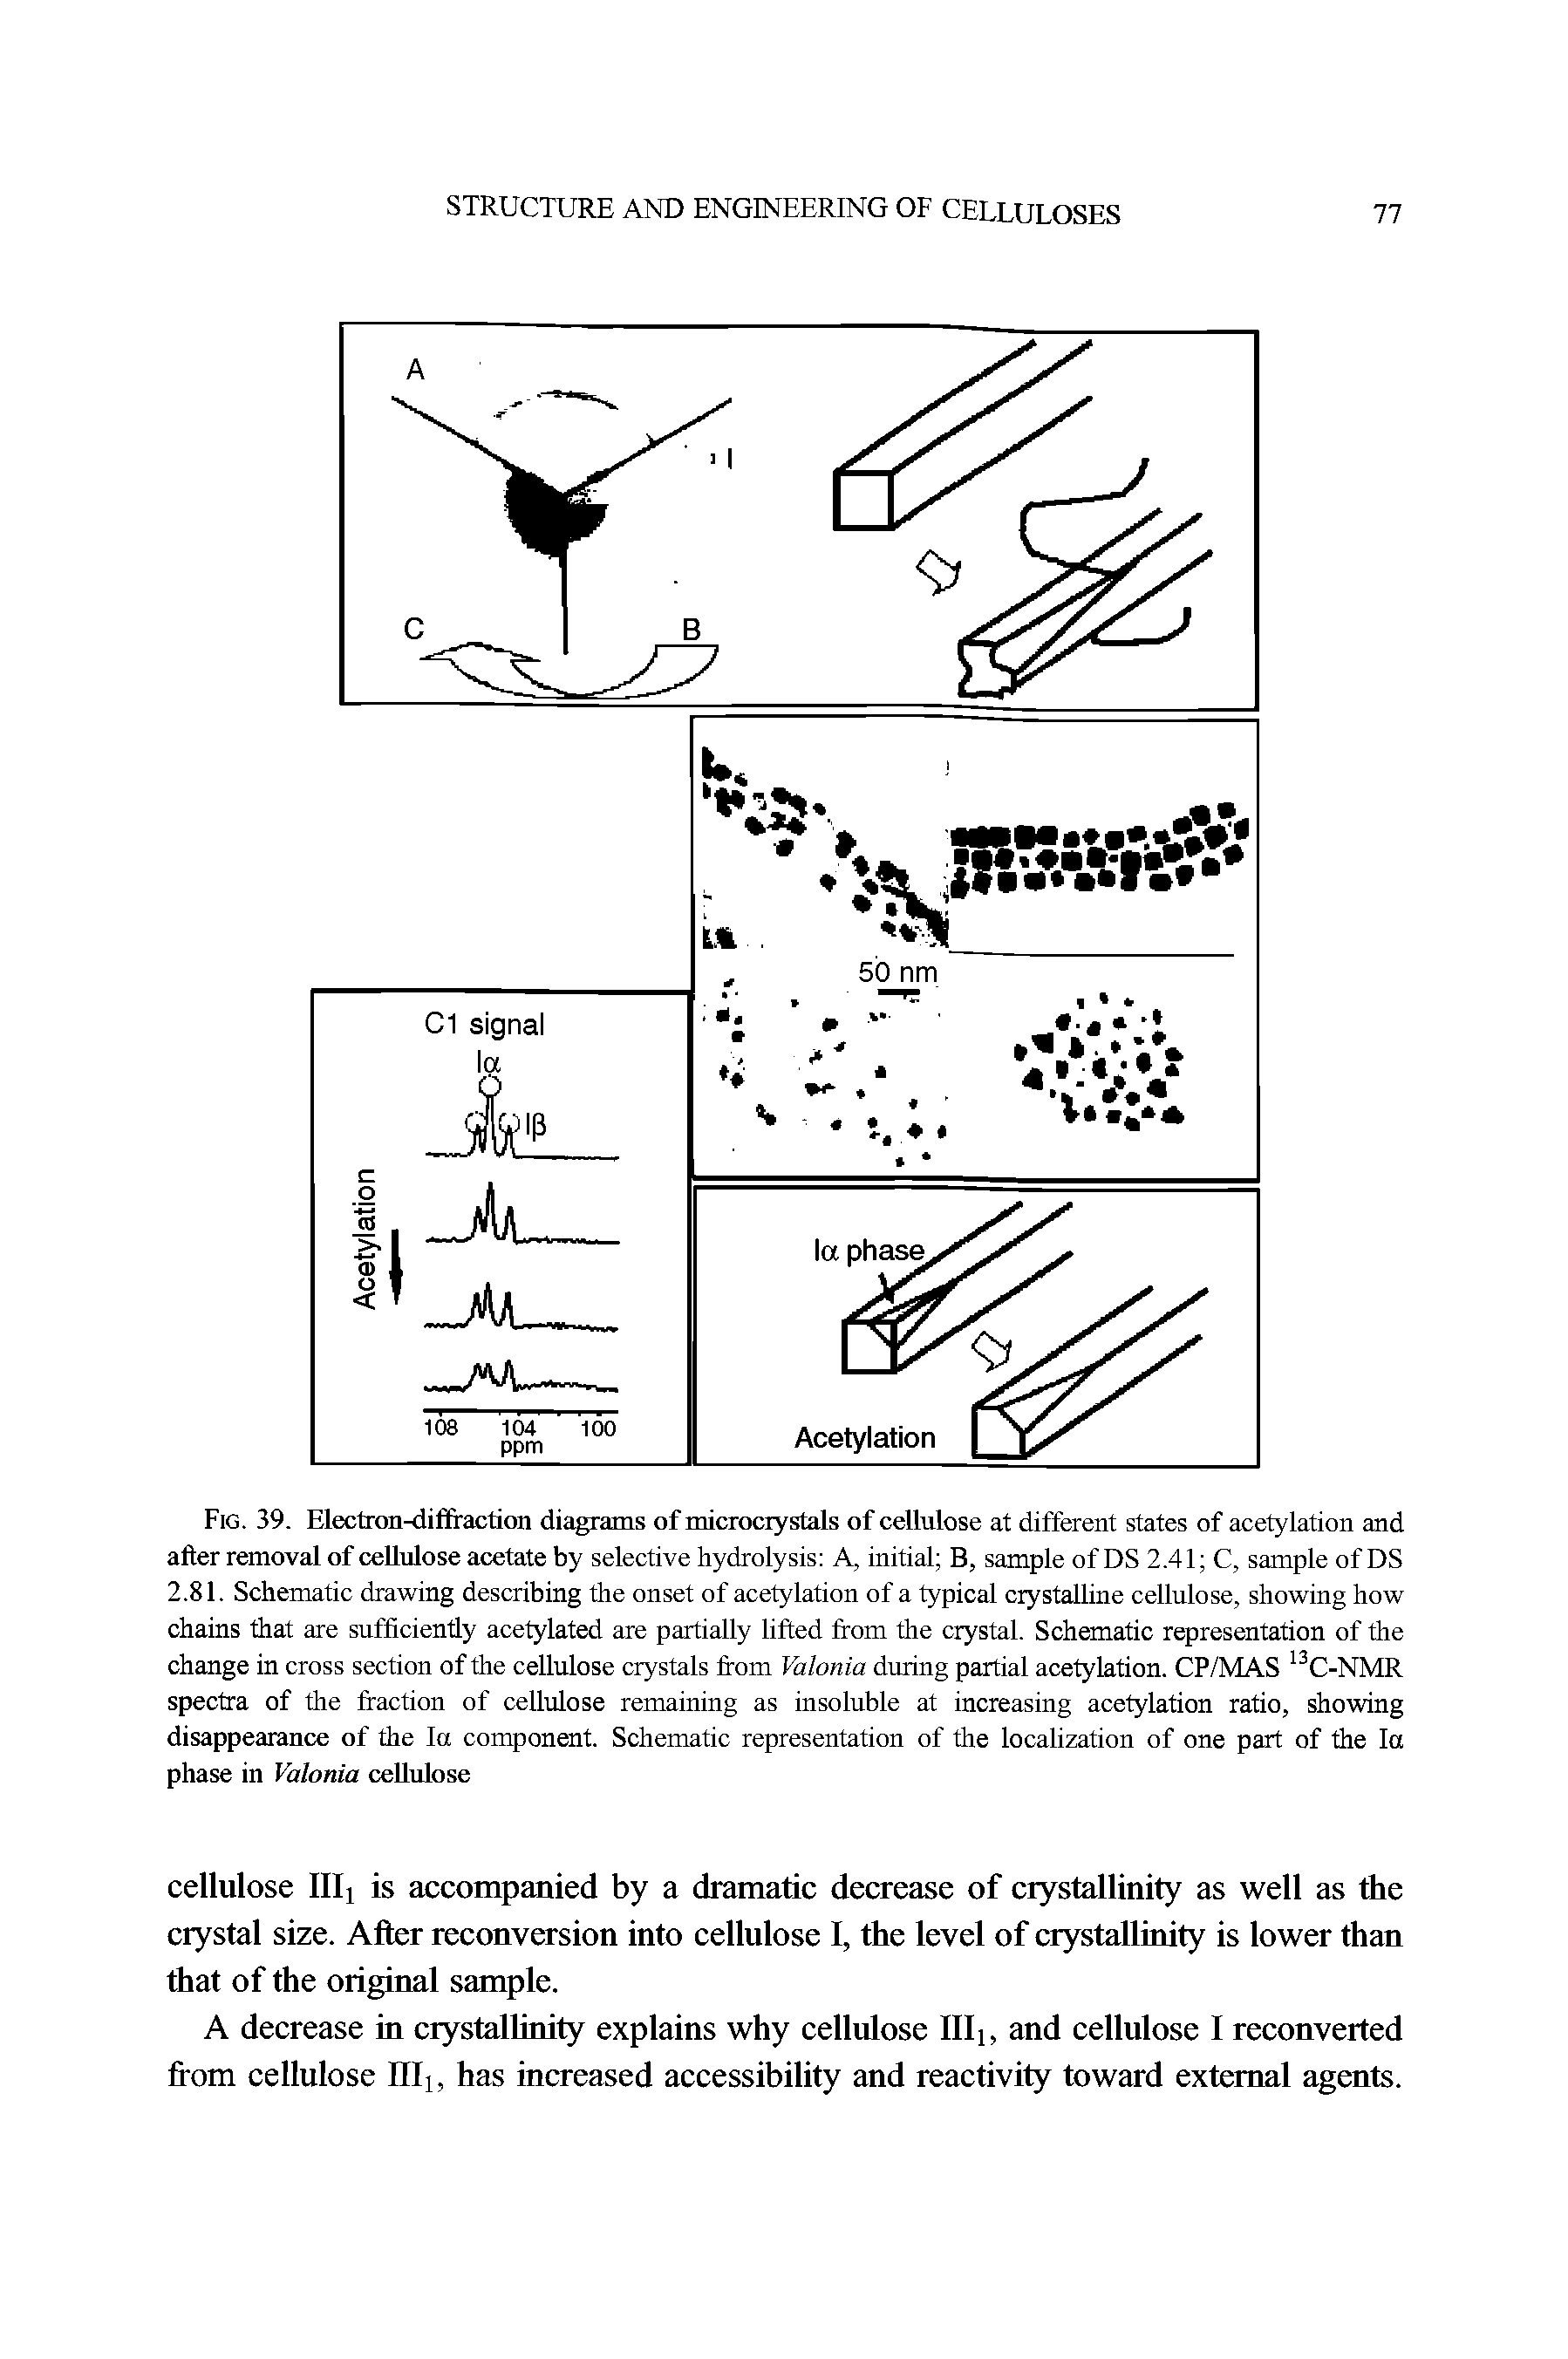 Fig. 39. Electron-diffraction diagrams of microciystals of cellulose at different states of acetylation and after removal of cellulose acetate by selective hydrolysis A, initial B, sample of DS 2.41 C, sample of DS 2.81. Schematic drawing describing the onset of acetylation of a typical crystalline cellulose, showing how chains that are sufficiently acetylated are partially lifted from the crystal. Schematic representation of the change in cross section of the cellulose crystals from Valonia during partial acetylation. CP/MAS C-NMR spectra of the fraction of cellrtlose remaining as insoluble at increasing acetylation ratio, showing disappearance of the la component. Schematic representation of the localization of one part of the la phase in Valonia cellulose...